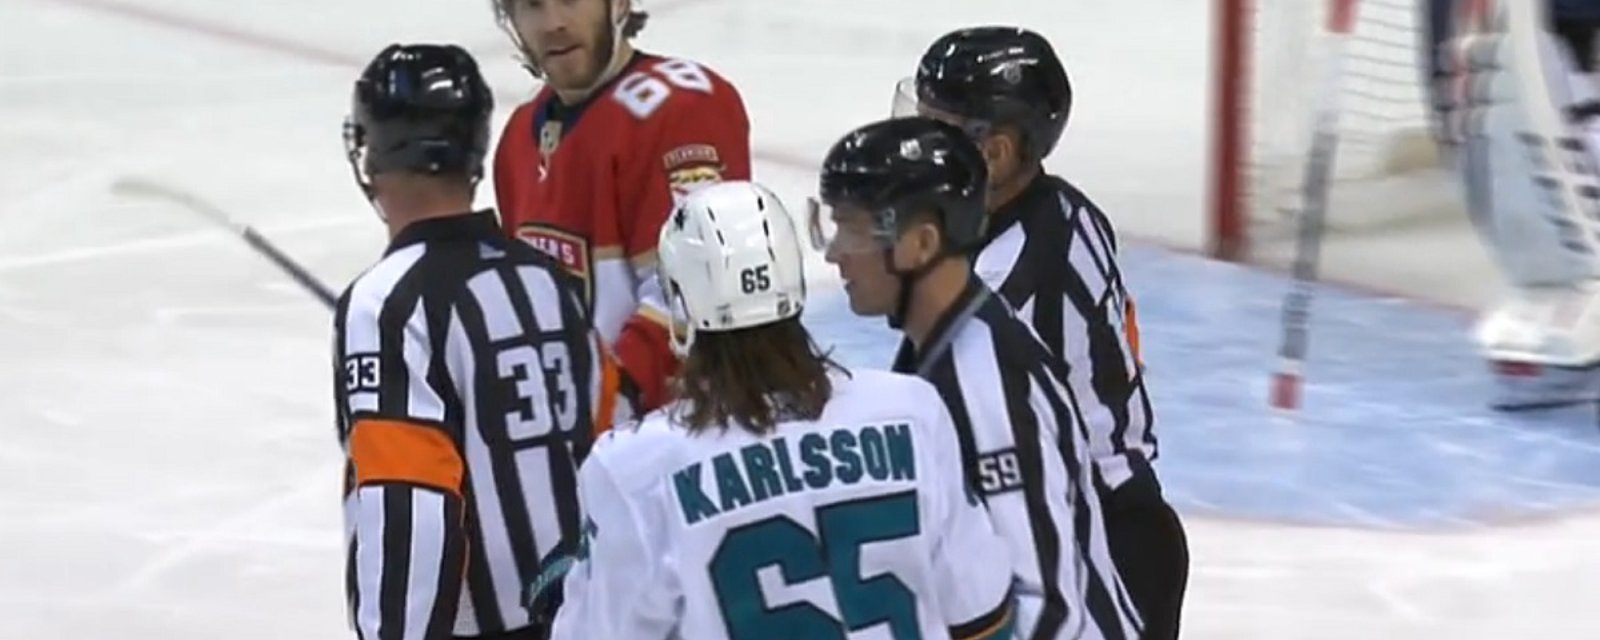 Karlsson and Hoffman get heated in their first meeting since leaving Ottawa.